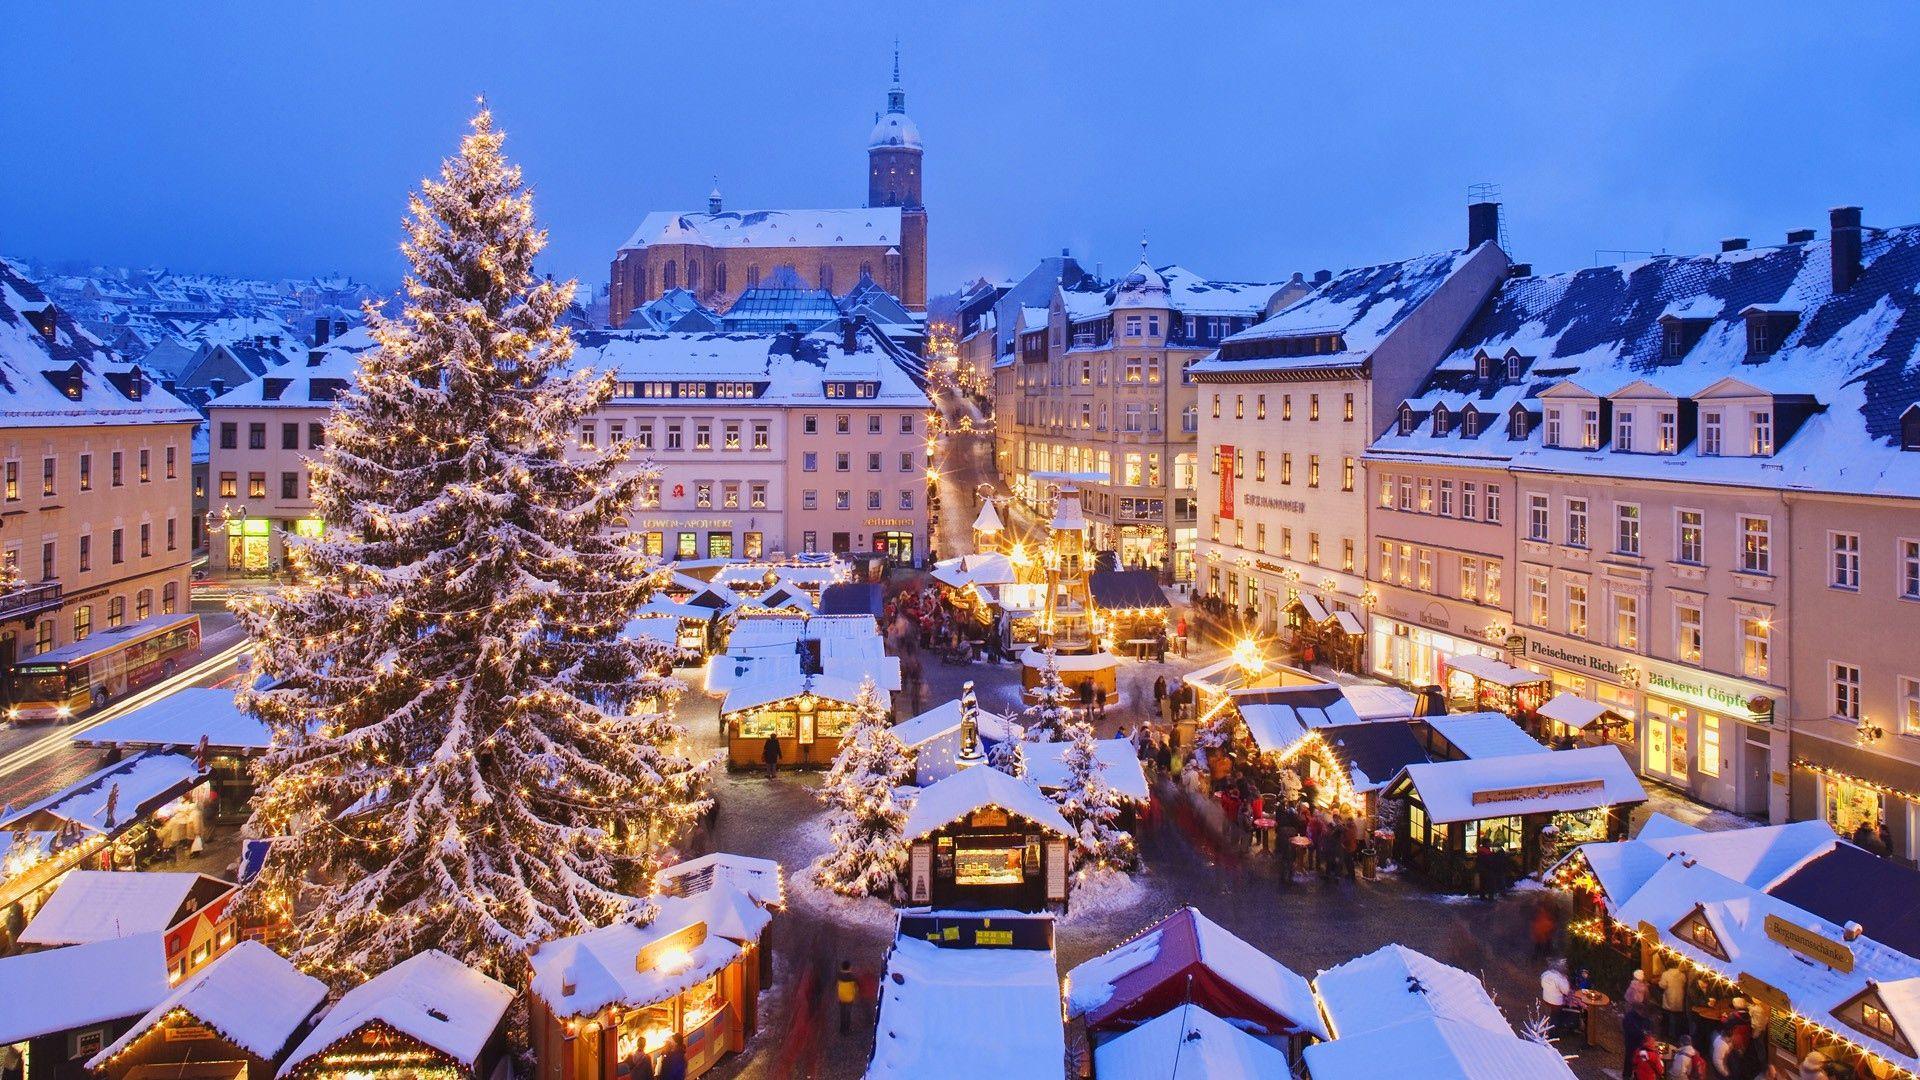 Download wallpaper 1920x1080 germany, markets, area, christmas HD background